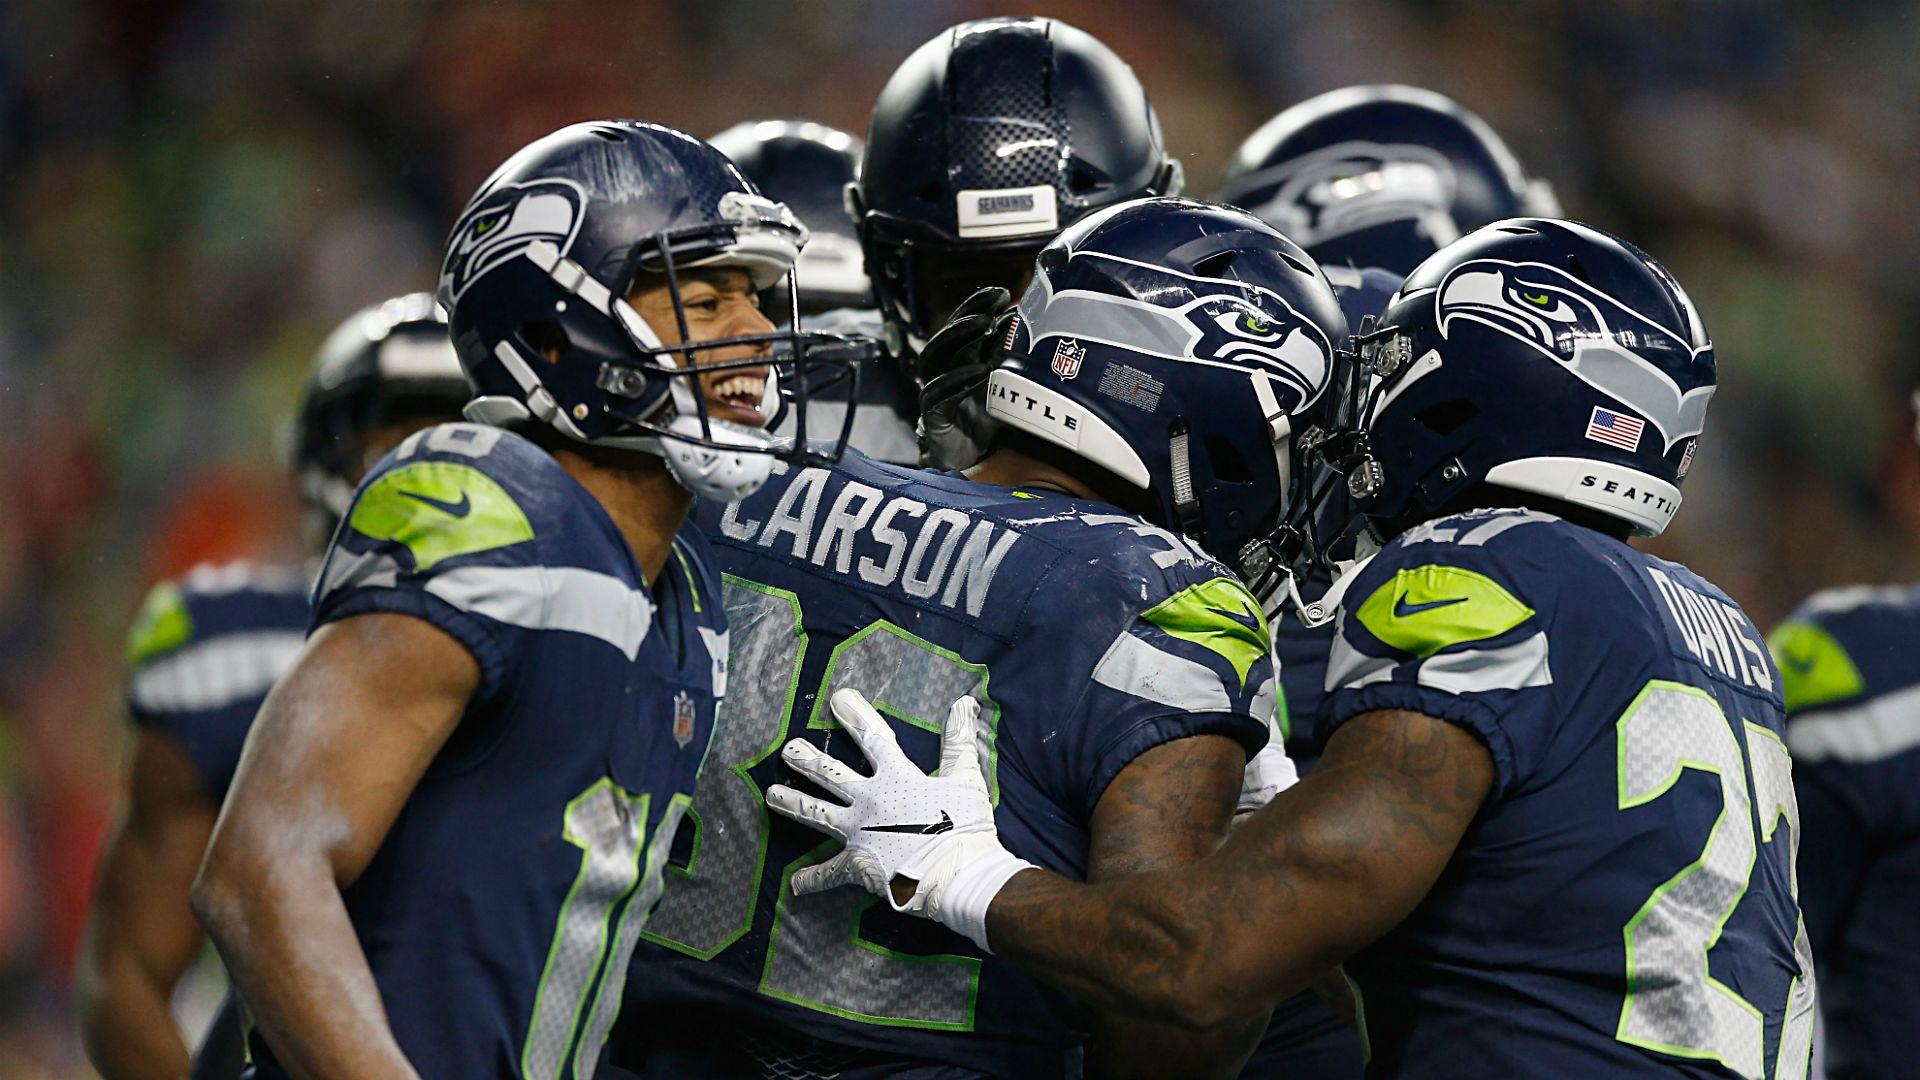 Chiefs vs. Seahawks: Score, results, highlights from Seahawks win